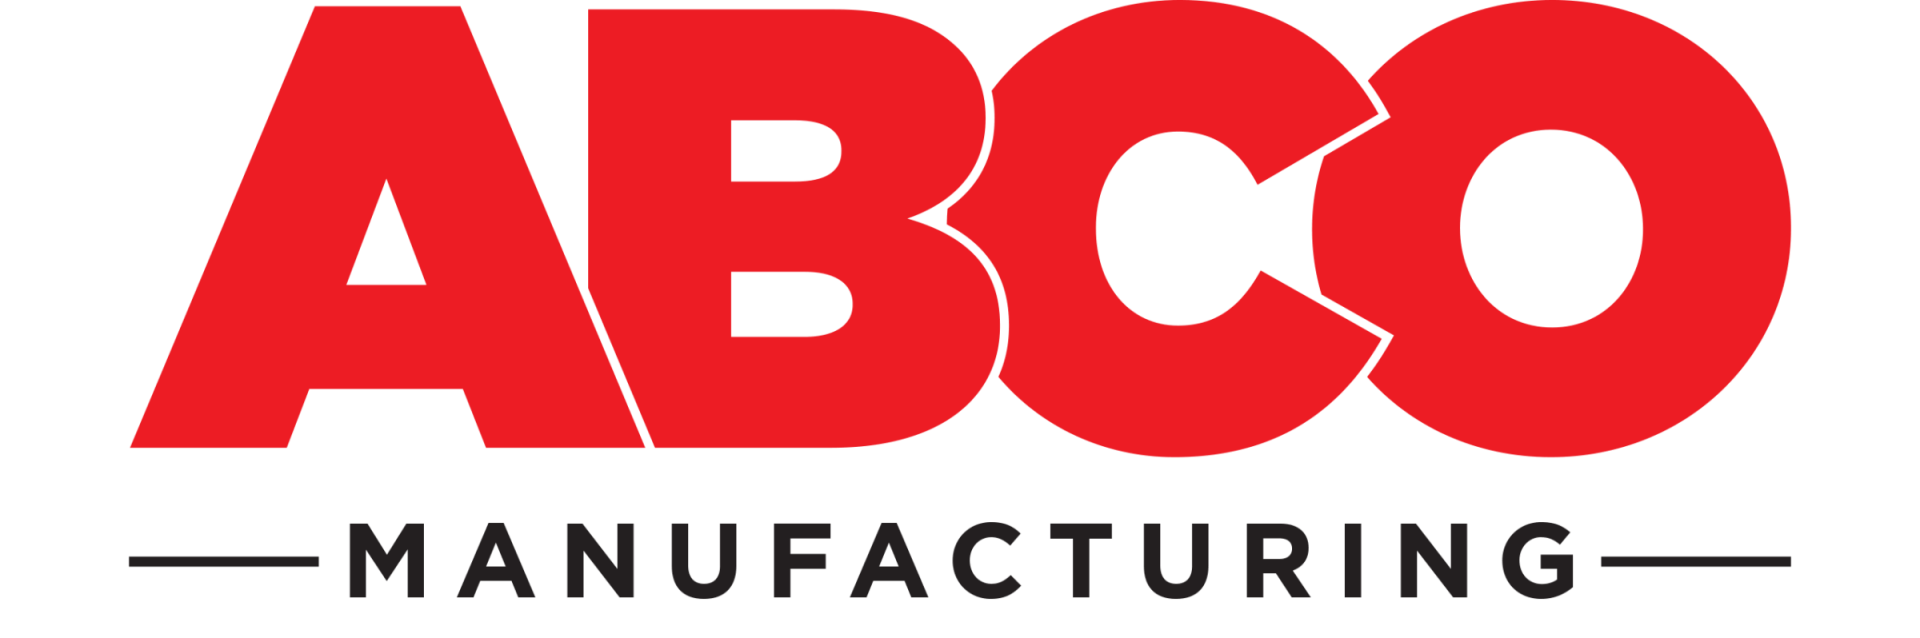 ABCO Manufacturing